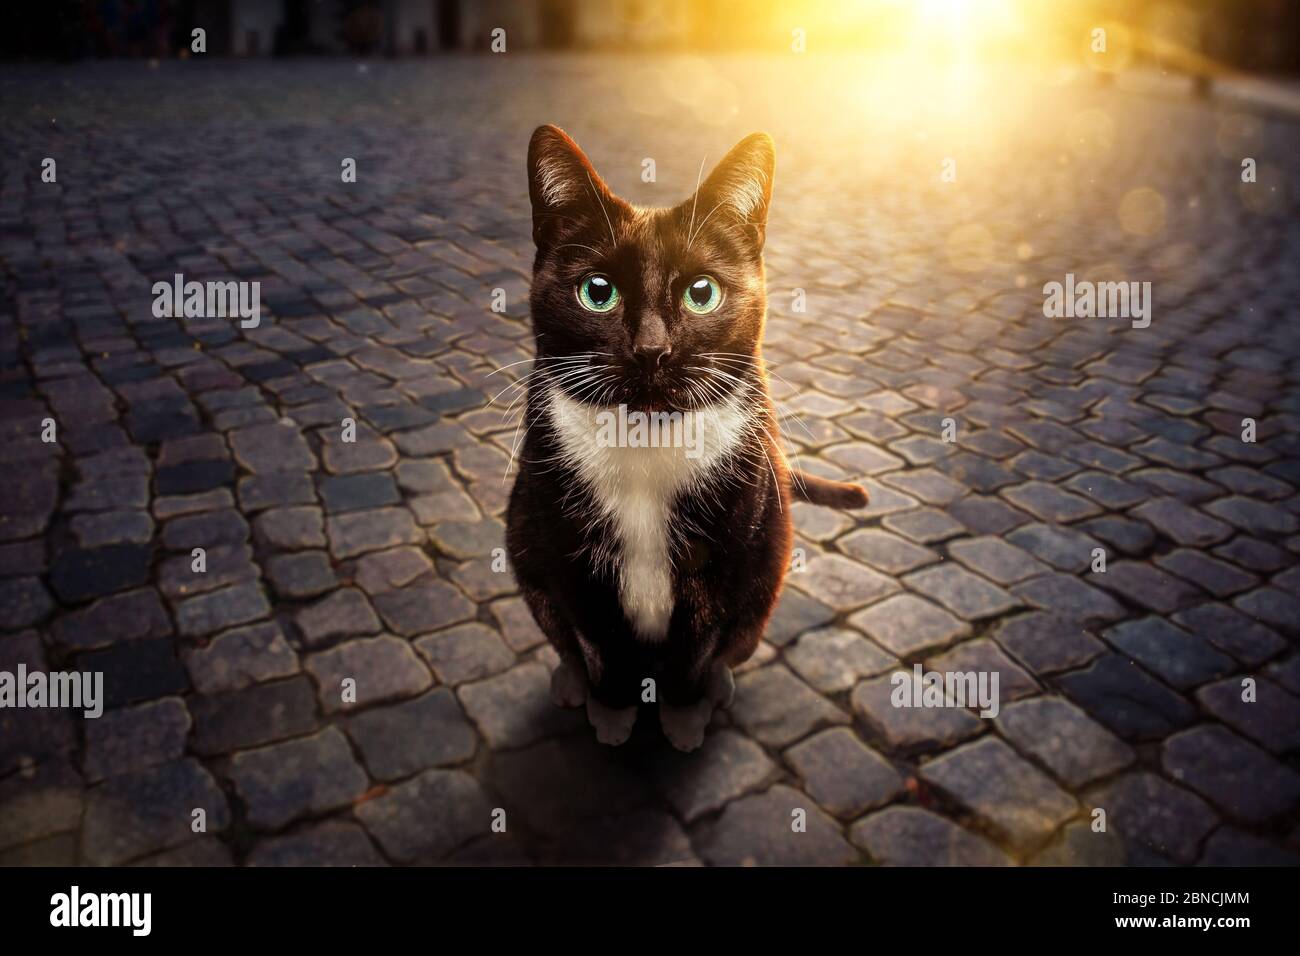 Black and white cat sitting on a street at sunset Stock Photo